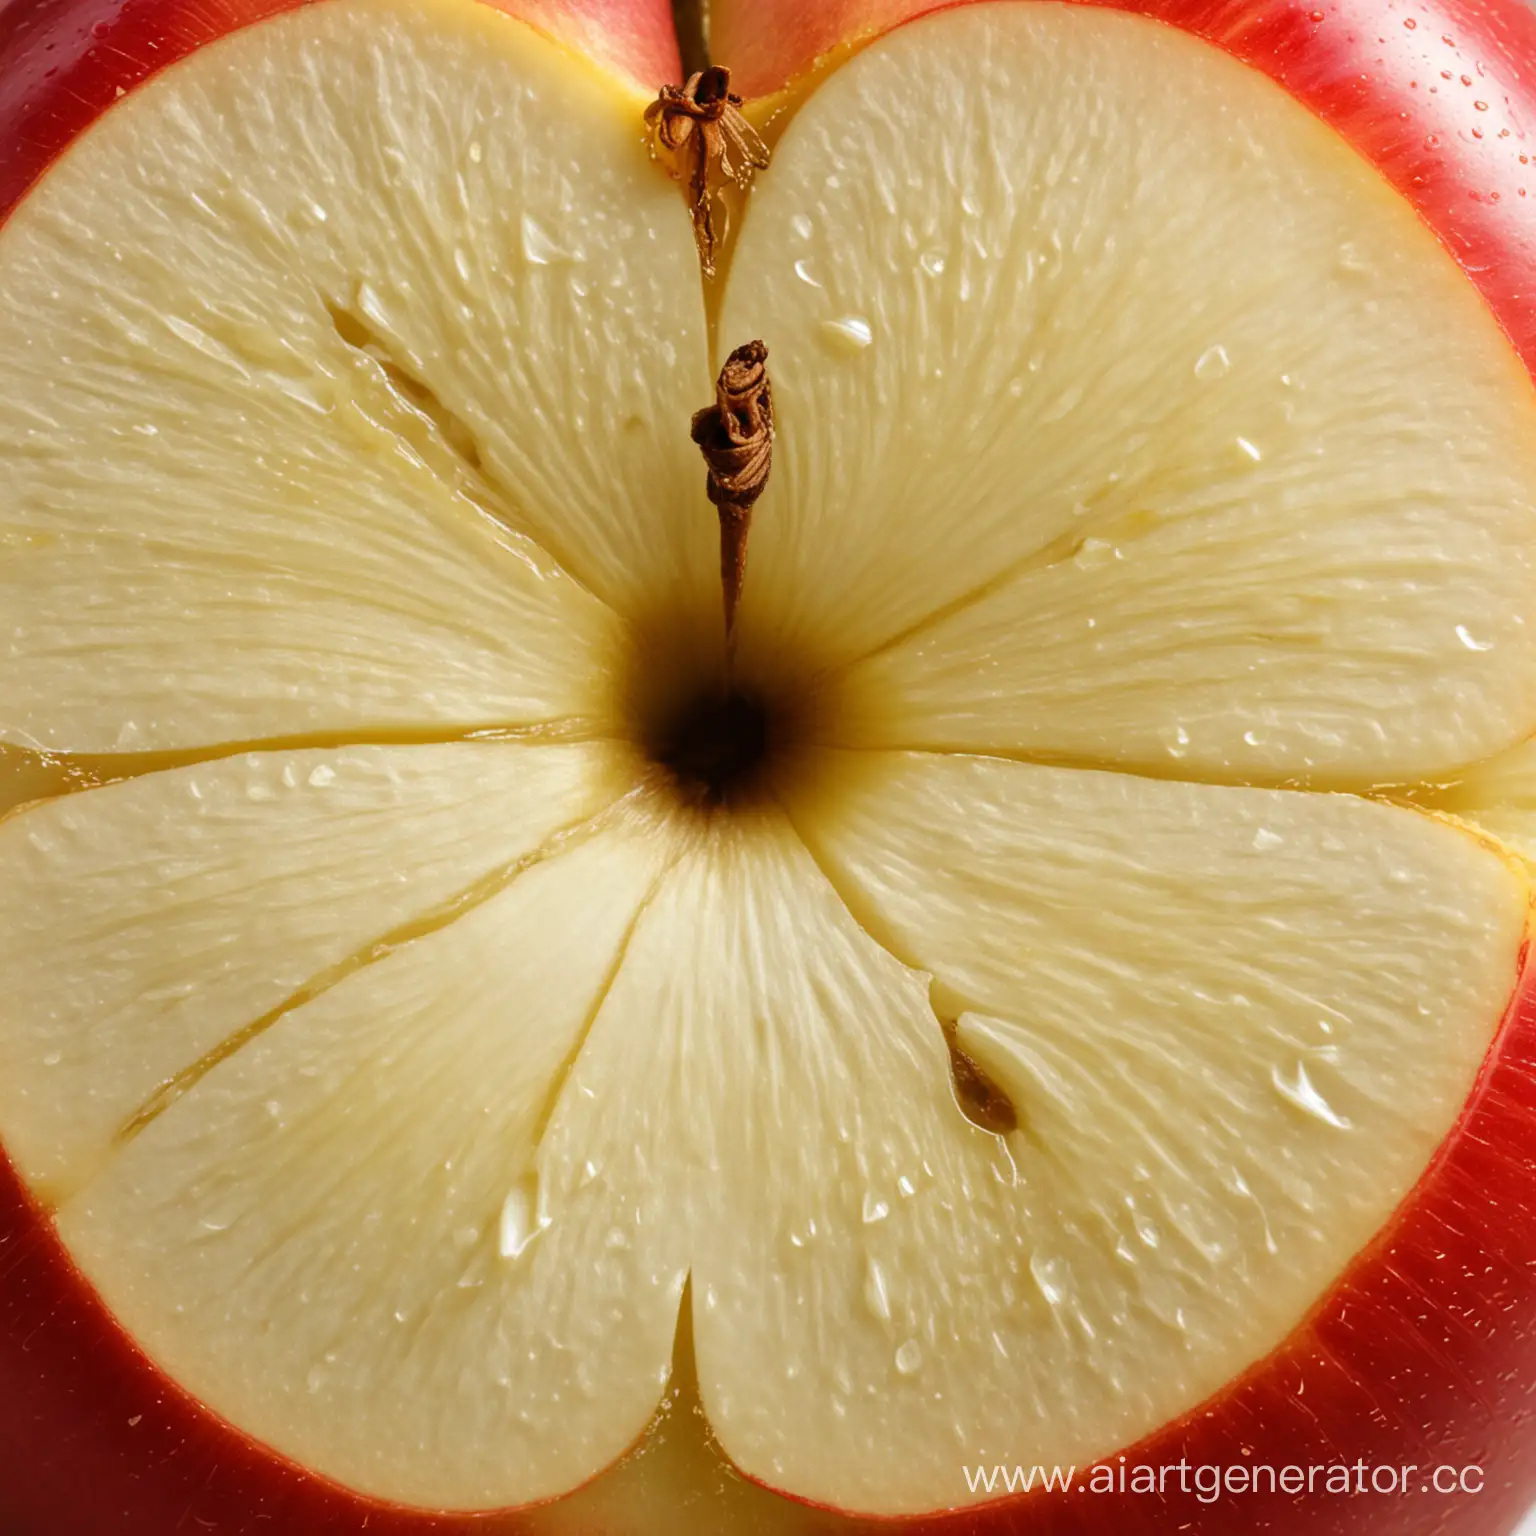 Beautiful and very appetizing apple cut into a piece